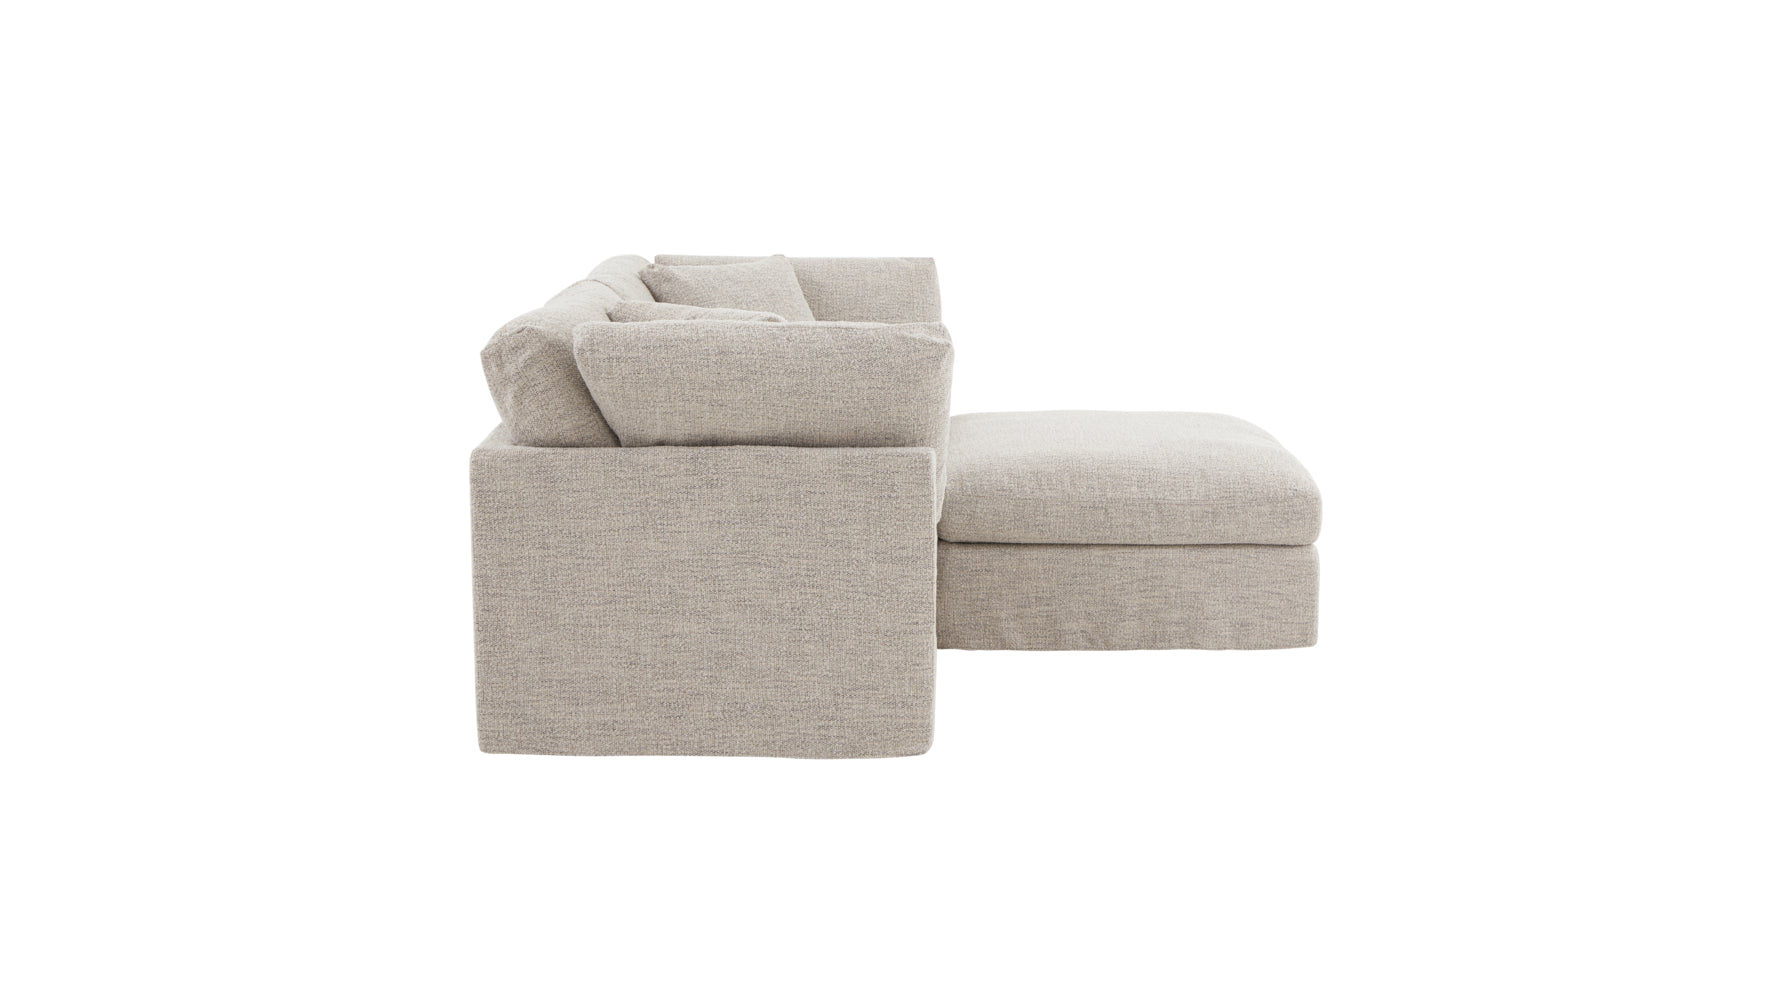 Get Together™ 3-Piece Modular Sectional, Standard, Oatmeal - Image 6